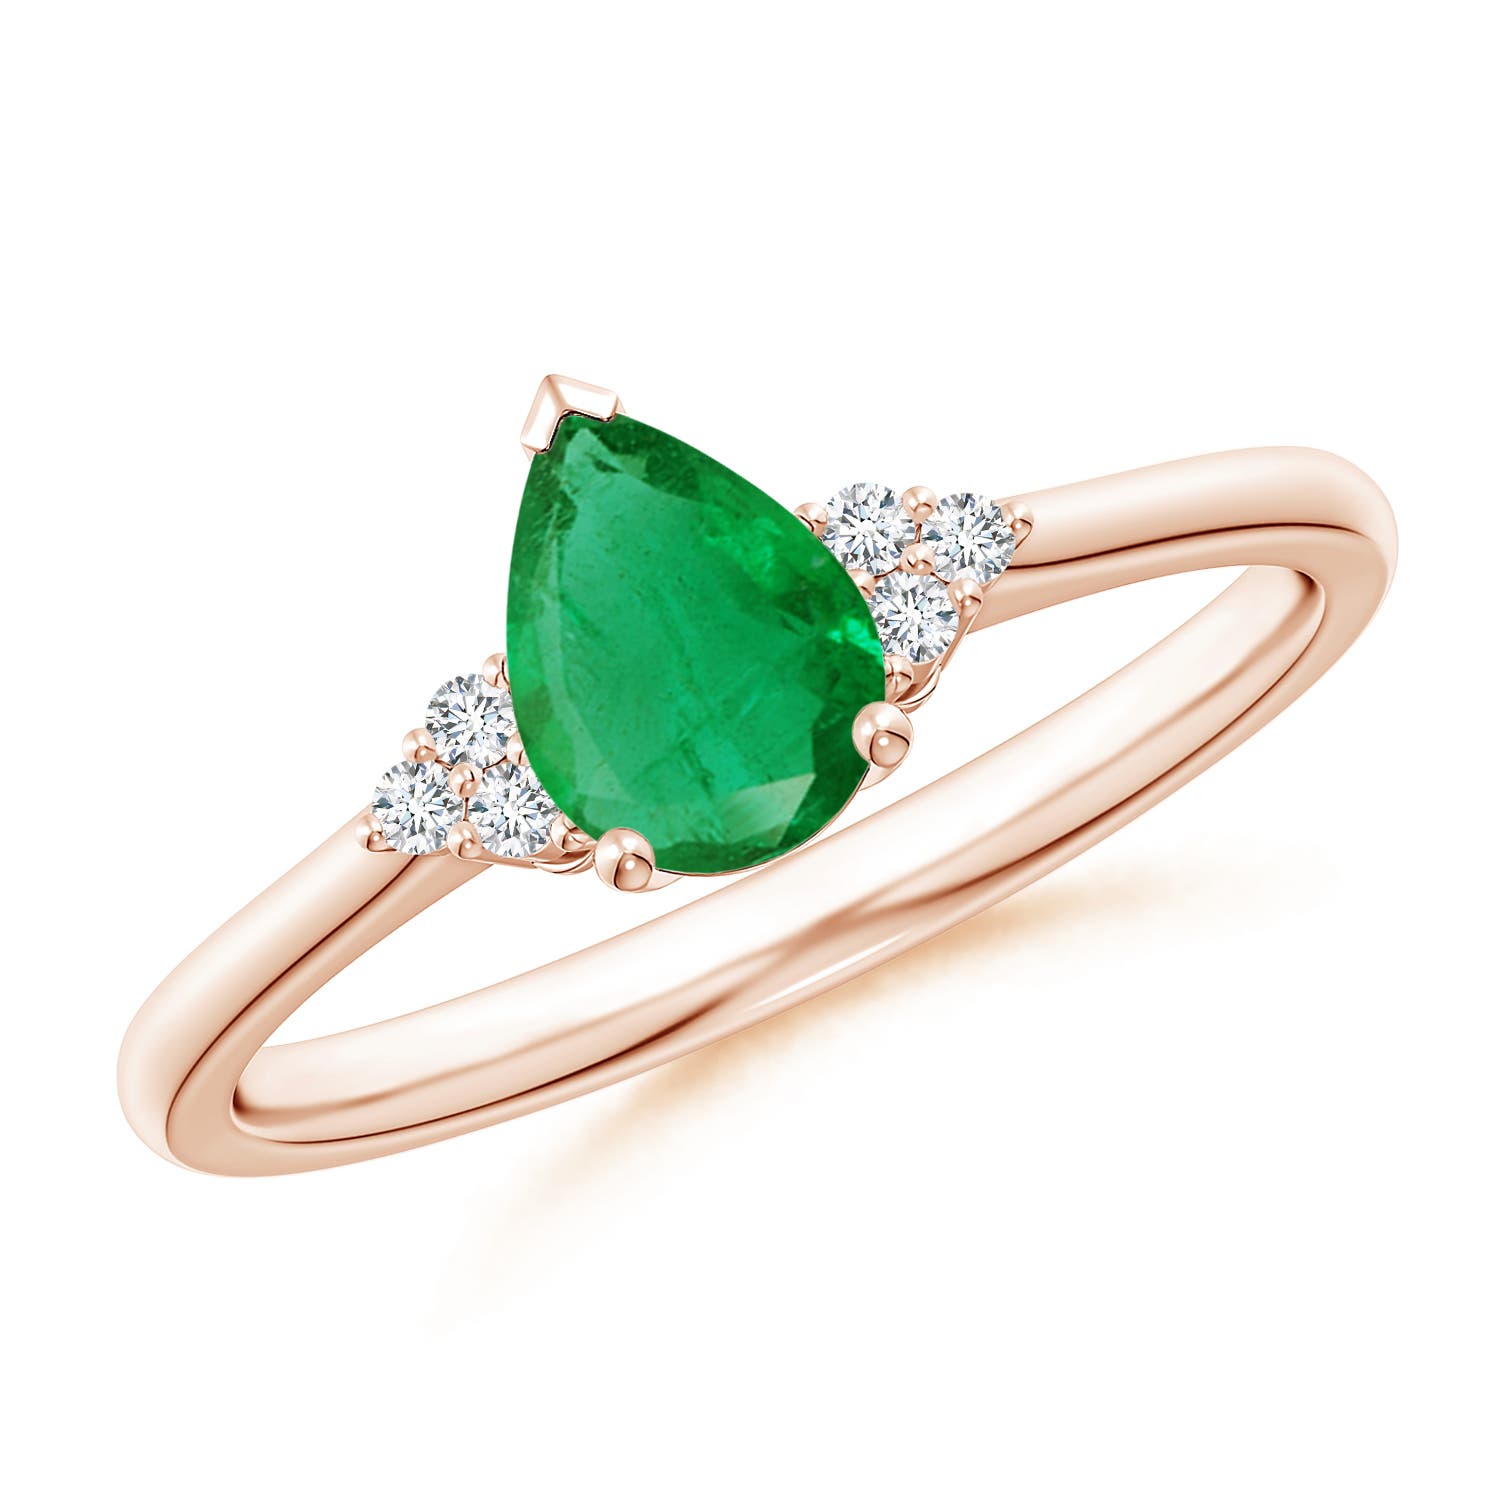 AA - Emerald / 0.66 CT / 14 KT Rose Gold